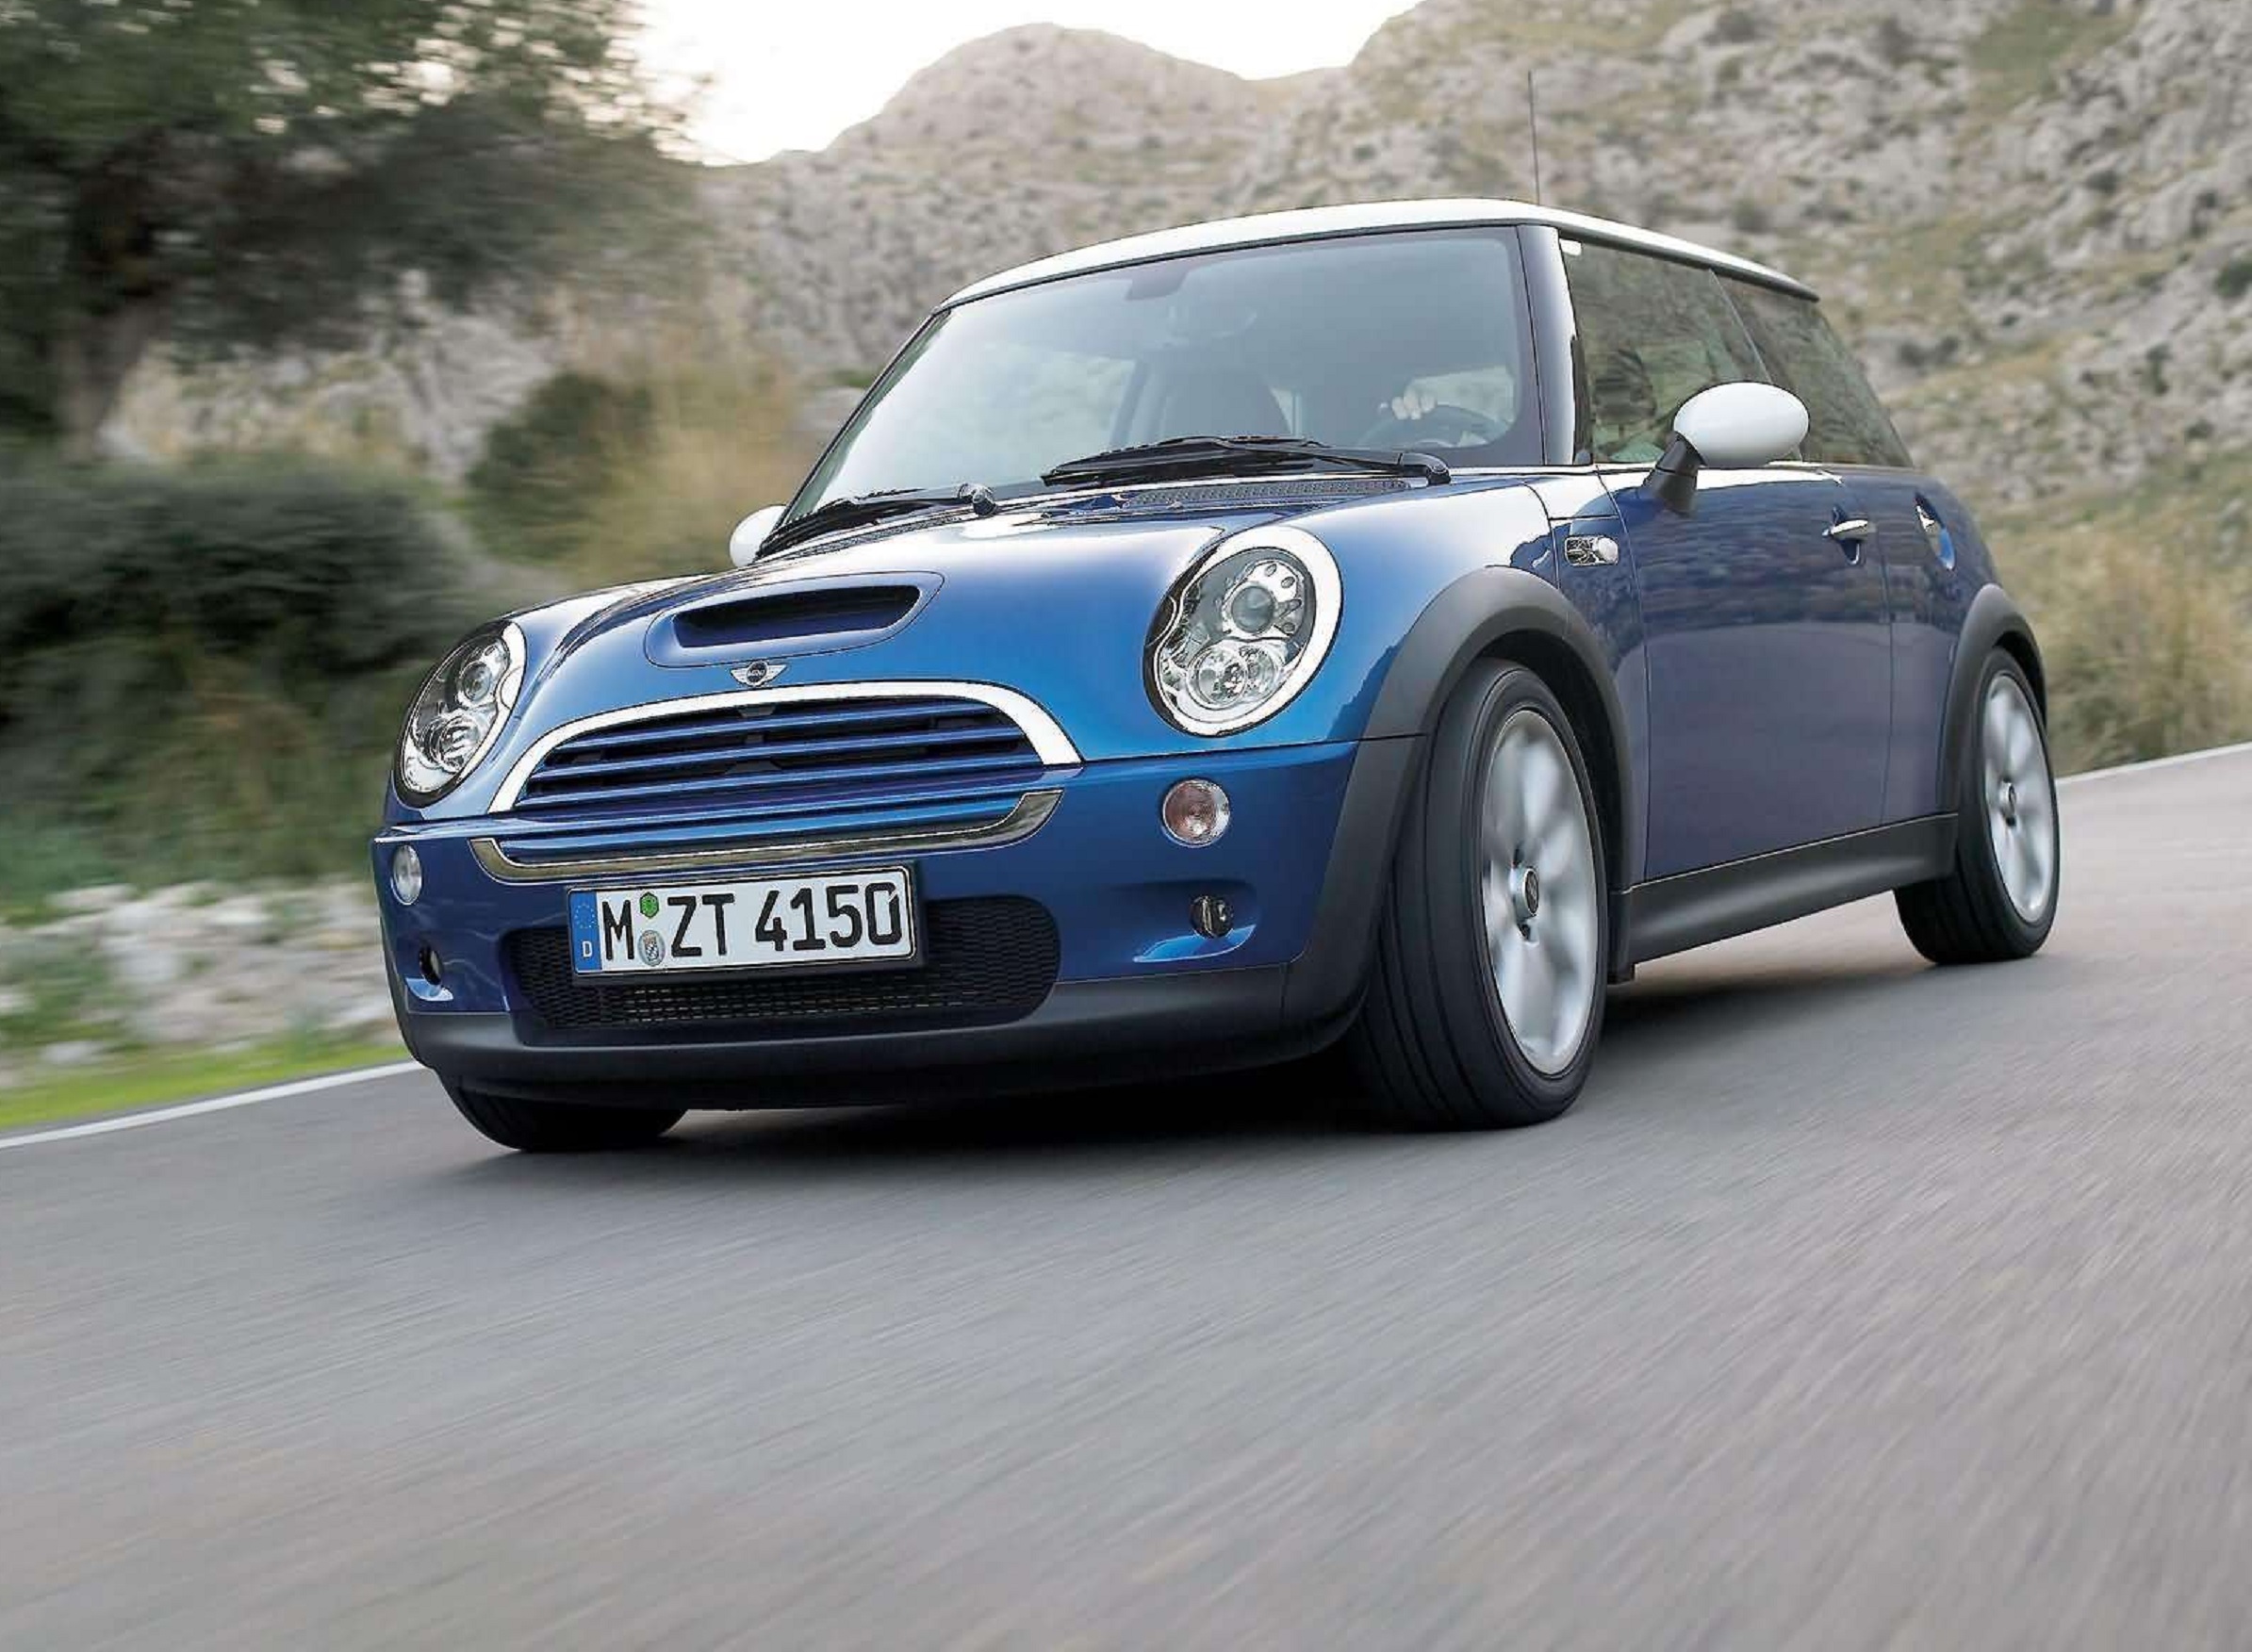 A blue 2005 R53 Mini Cooper S driving on a desert canyon road